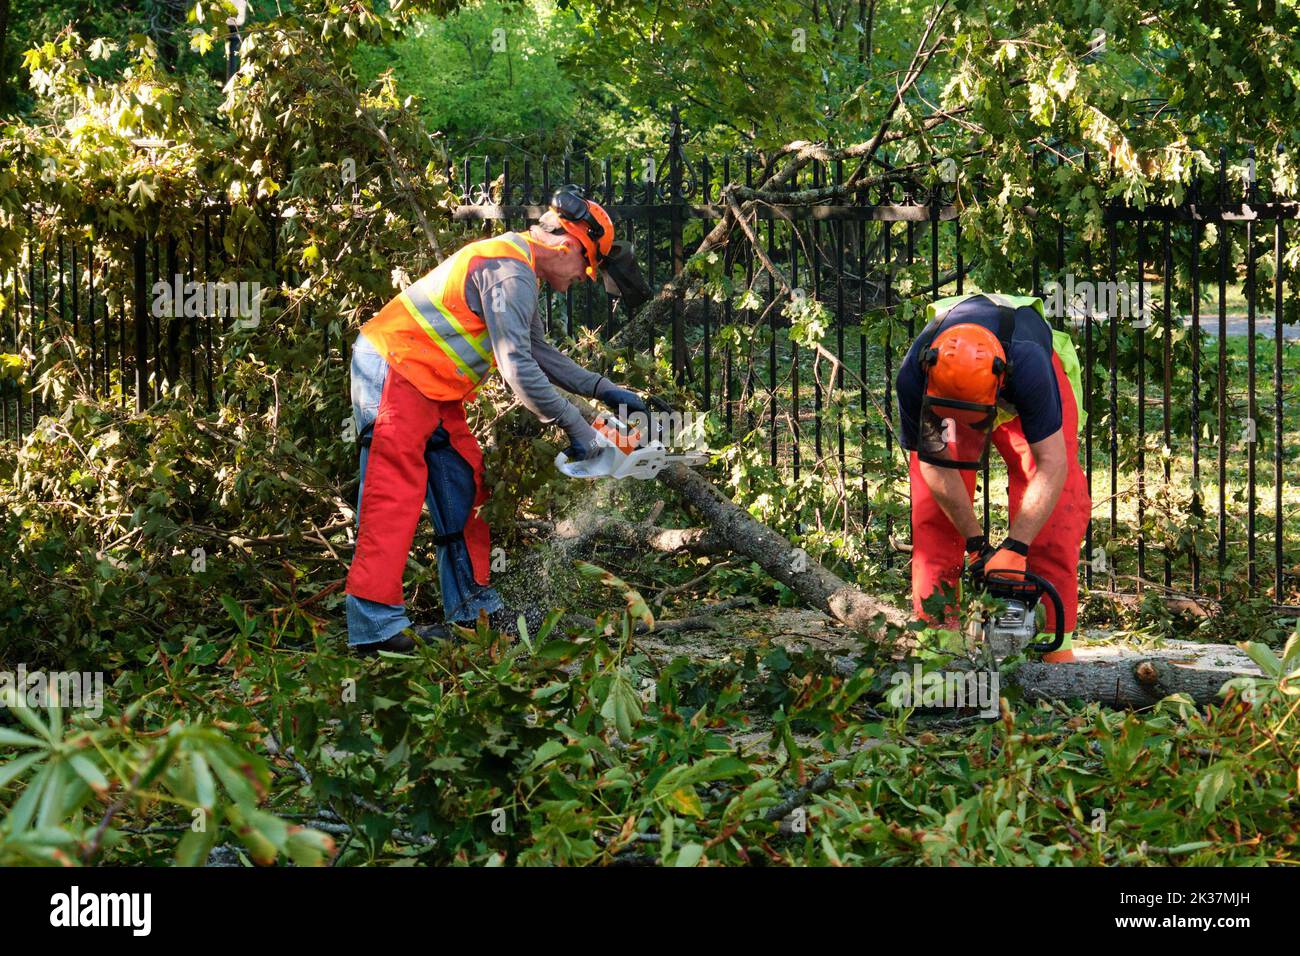 Halifax, Nova Scotia, Canada. September 25th, 2022. The post Hurricane Fiona clean up starts on the streets of Halifax. With thousands of trees down city workers are hard at work to clean up some of the major damage at the Halifax Public Gardens. Credit: meanderingemu/Alamy Live News Stock Photo